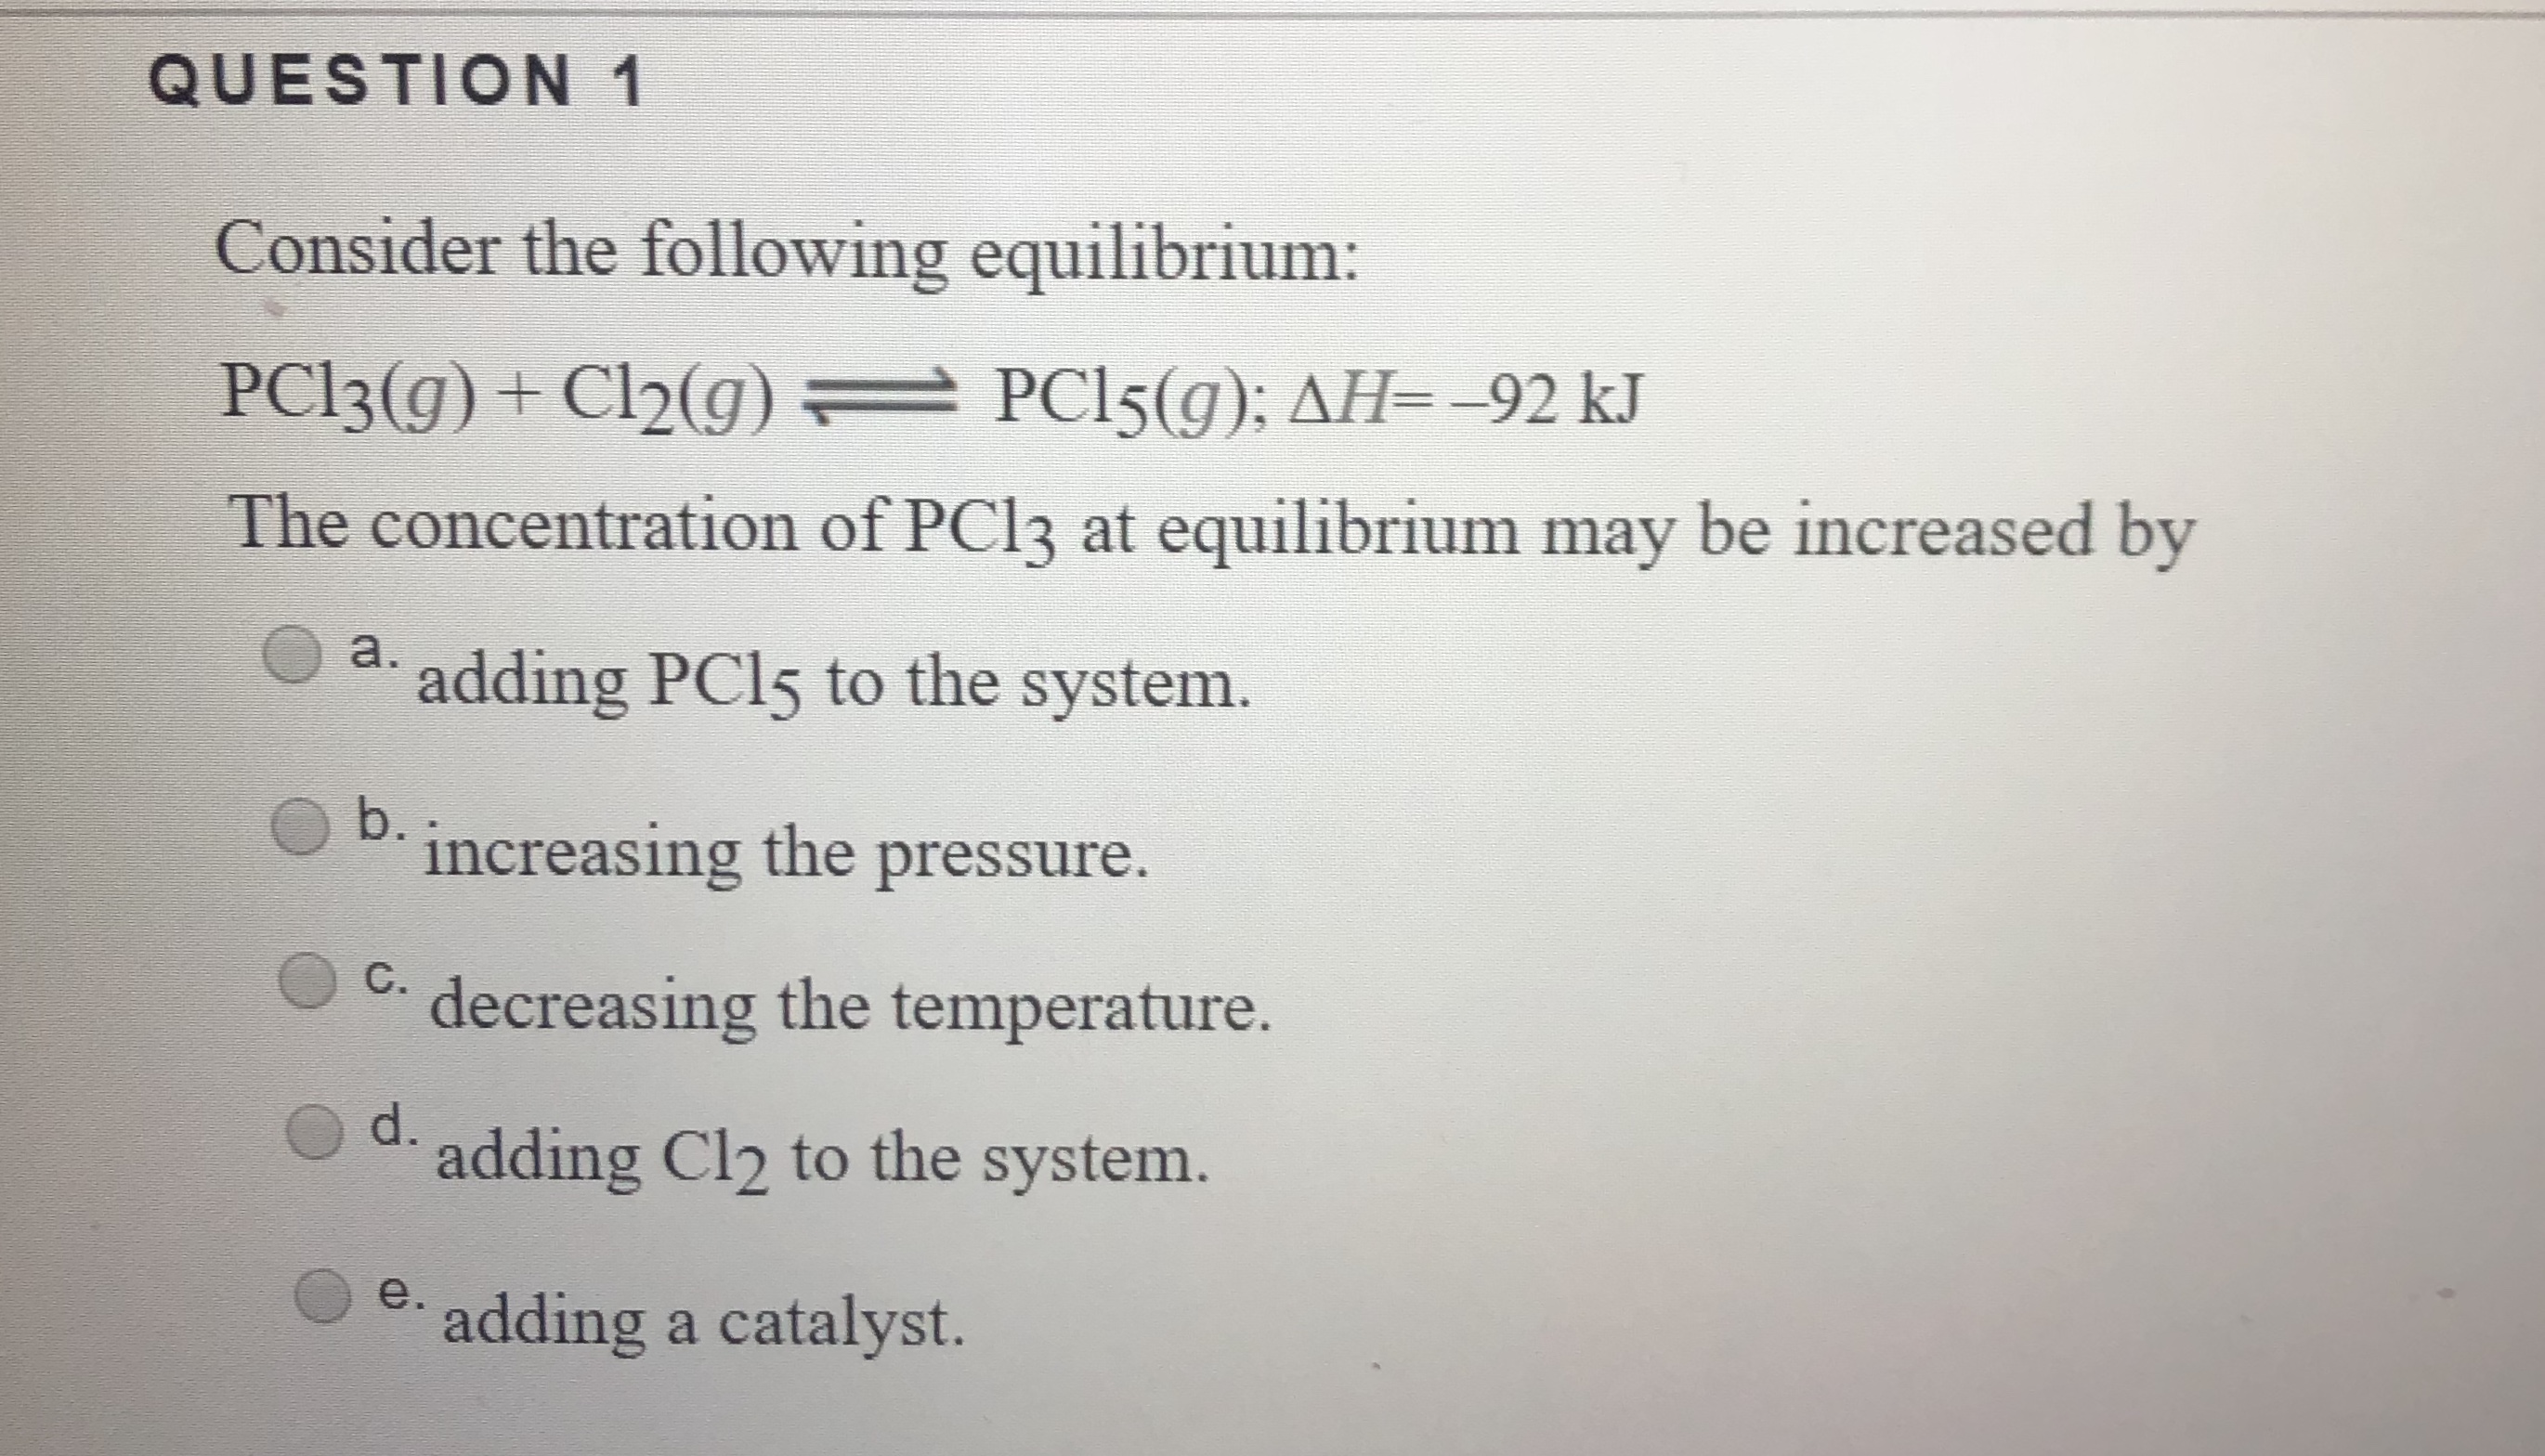 QUESTION 1
Consider the following equilibrium:
PCI3(g)+ Cl2(g)
PCI5(g): AH=-92 kJ
The concentration of PCI3 at equilibrium may be increased by
а.
adding PCI5 to the system.
b.
increasing the pressure.
decreasing the temperature.
d.
adding Cl2 to the system.
е.
adding a catalyst.
